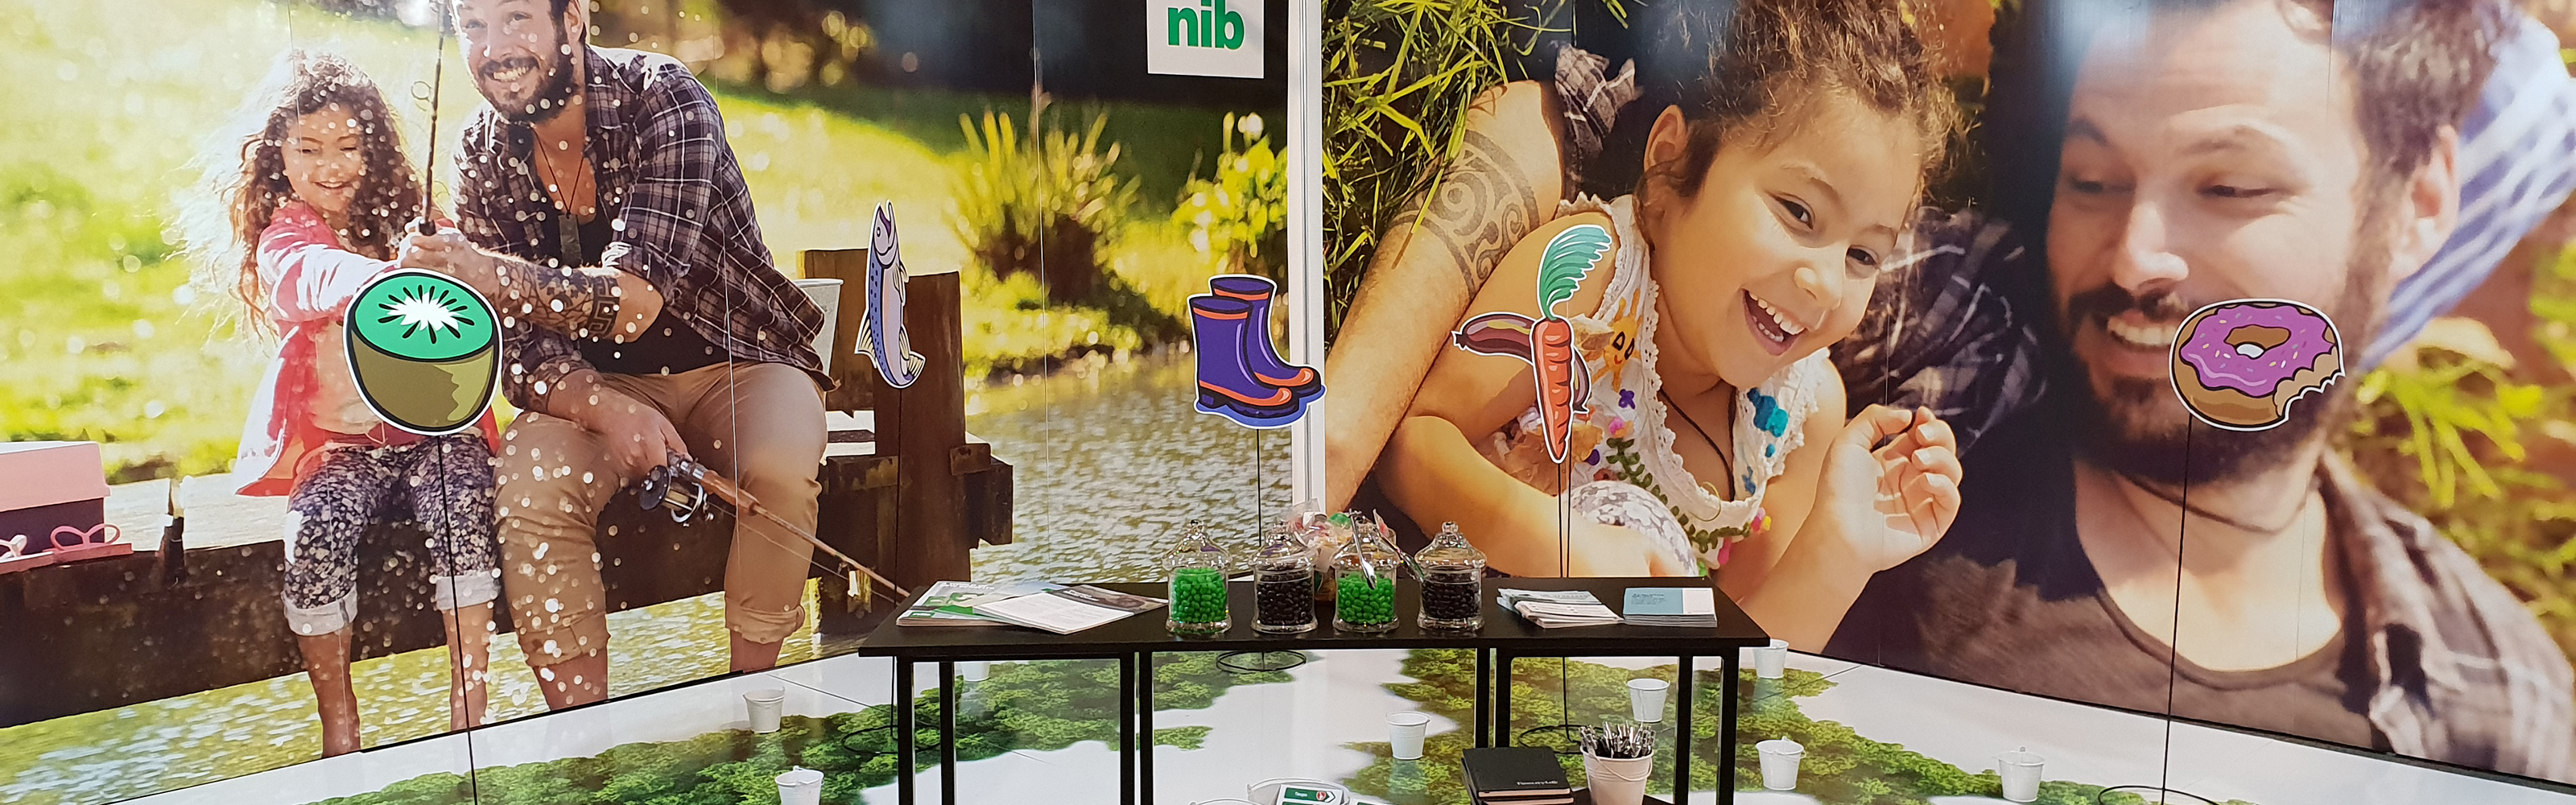 Cut the Mustard Exhibition Design // Fidelity Life and nib, National Advisors Conference 2018